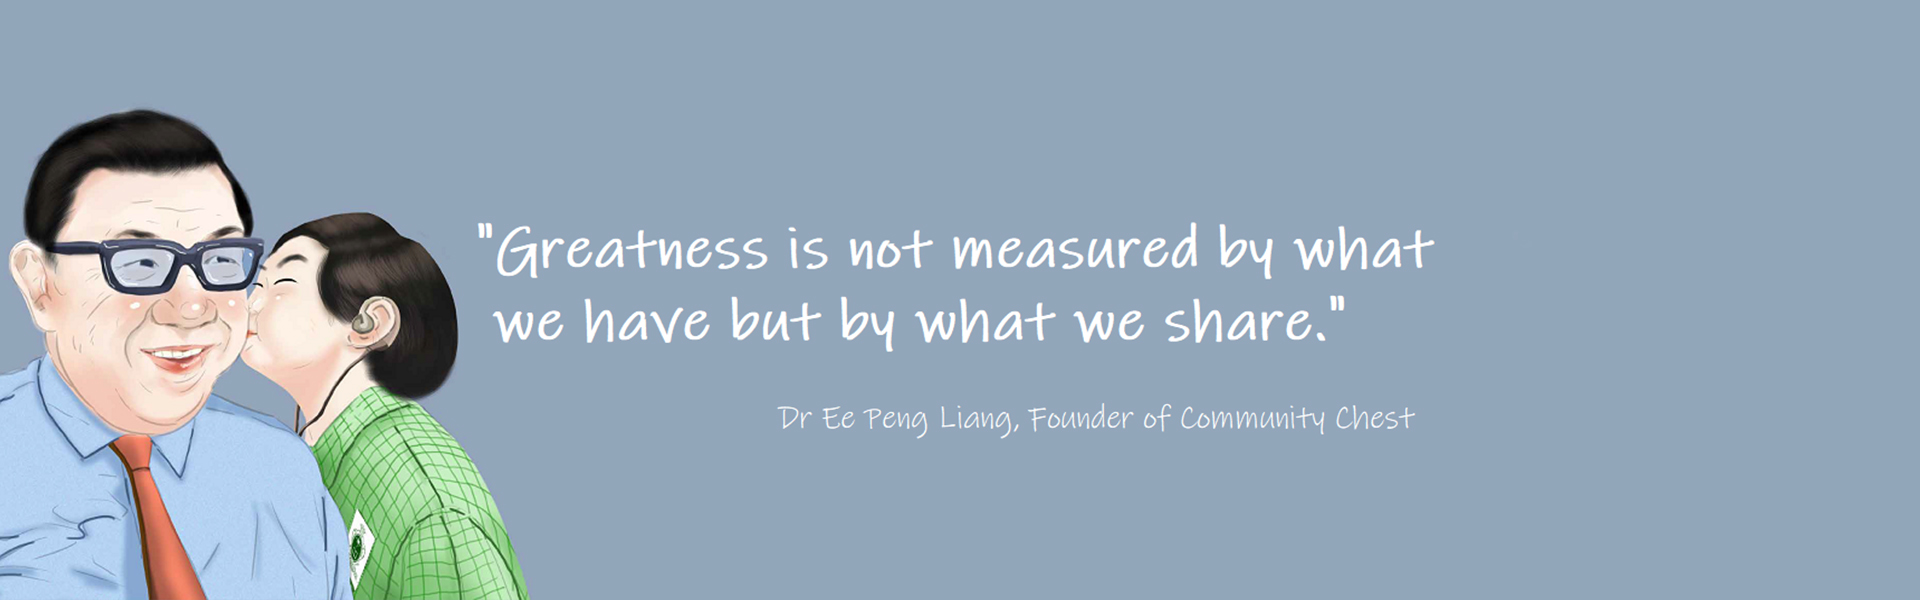 Dr Ee Peng Liang's Quote